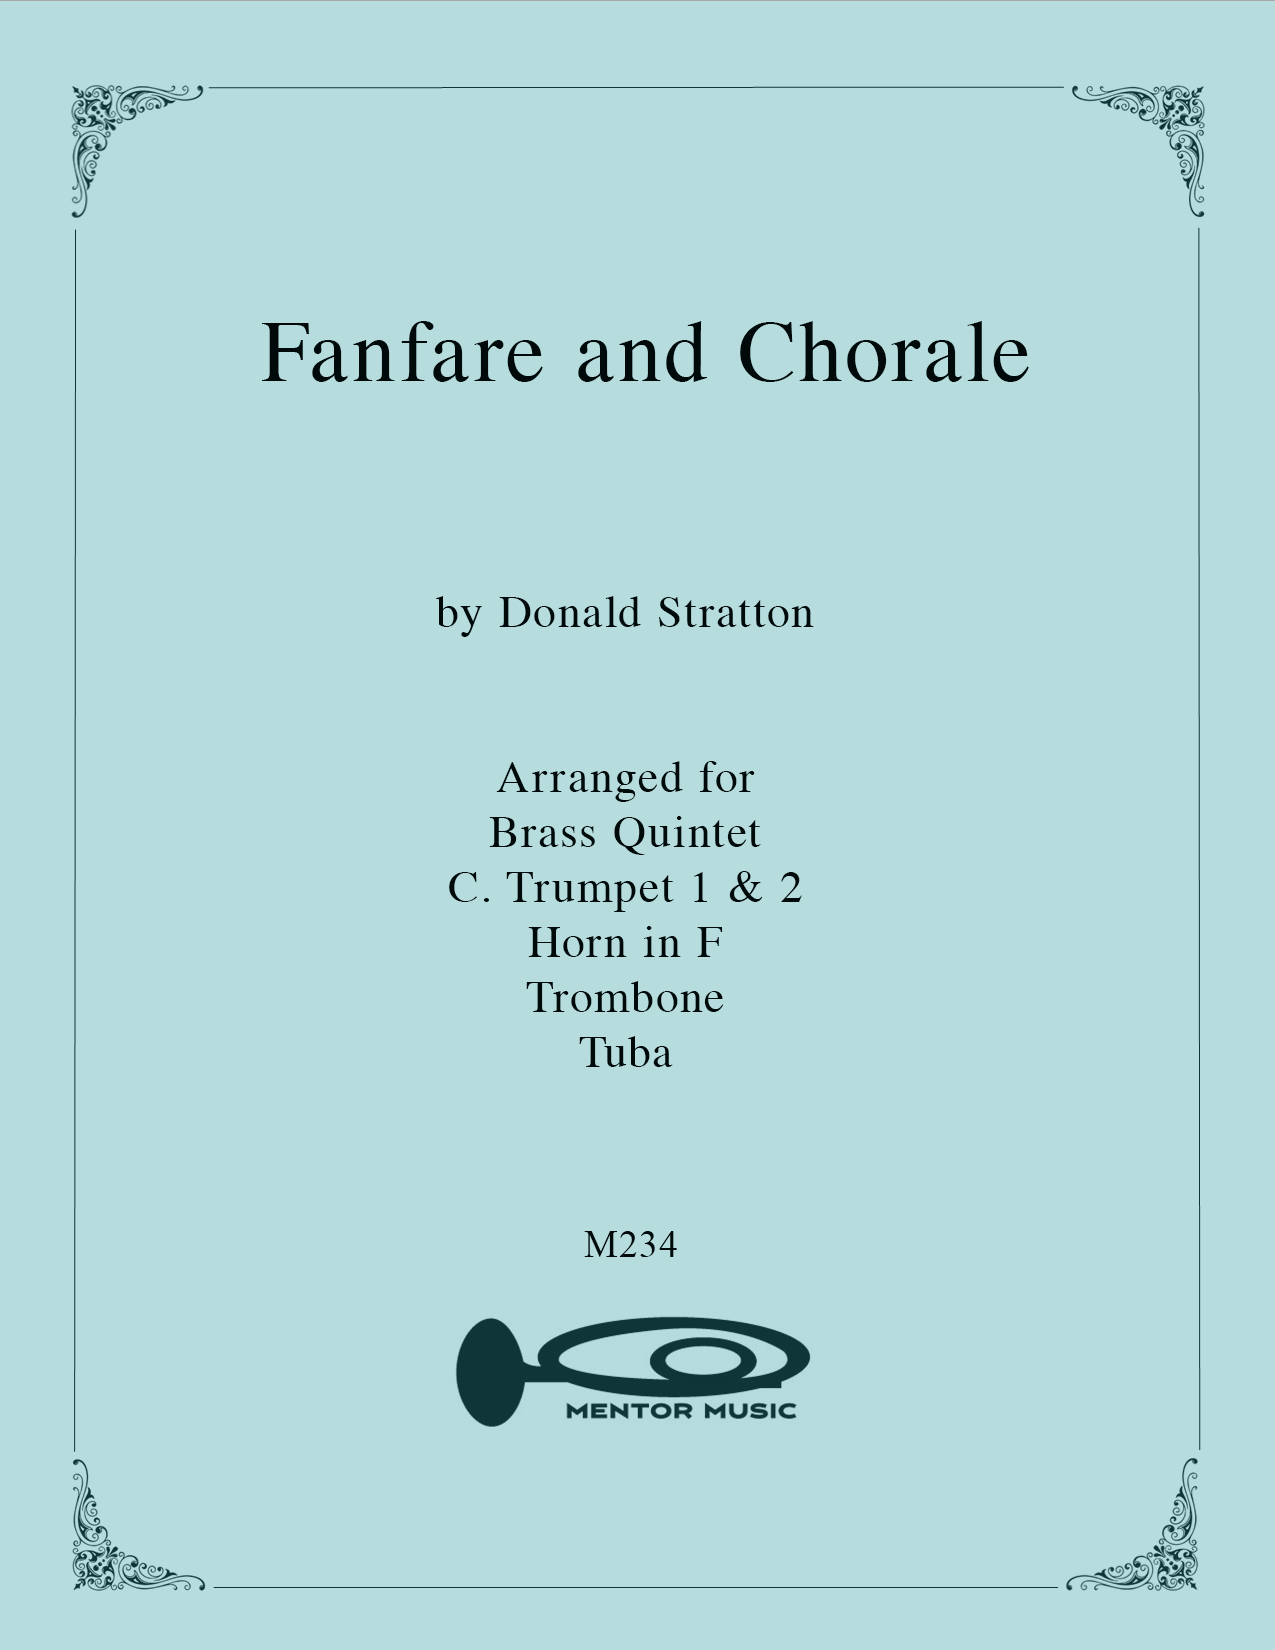 Fanfare and Chorale for Brass Quintet